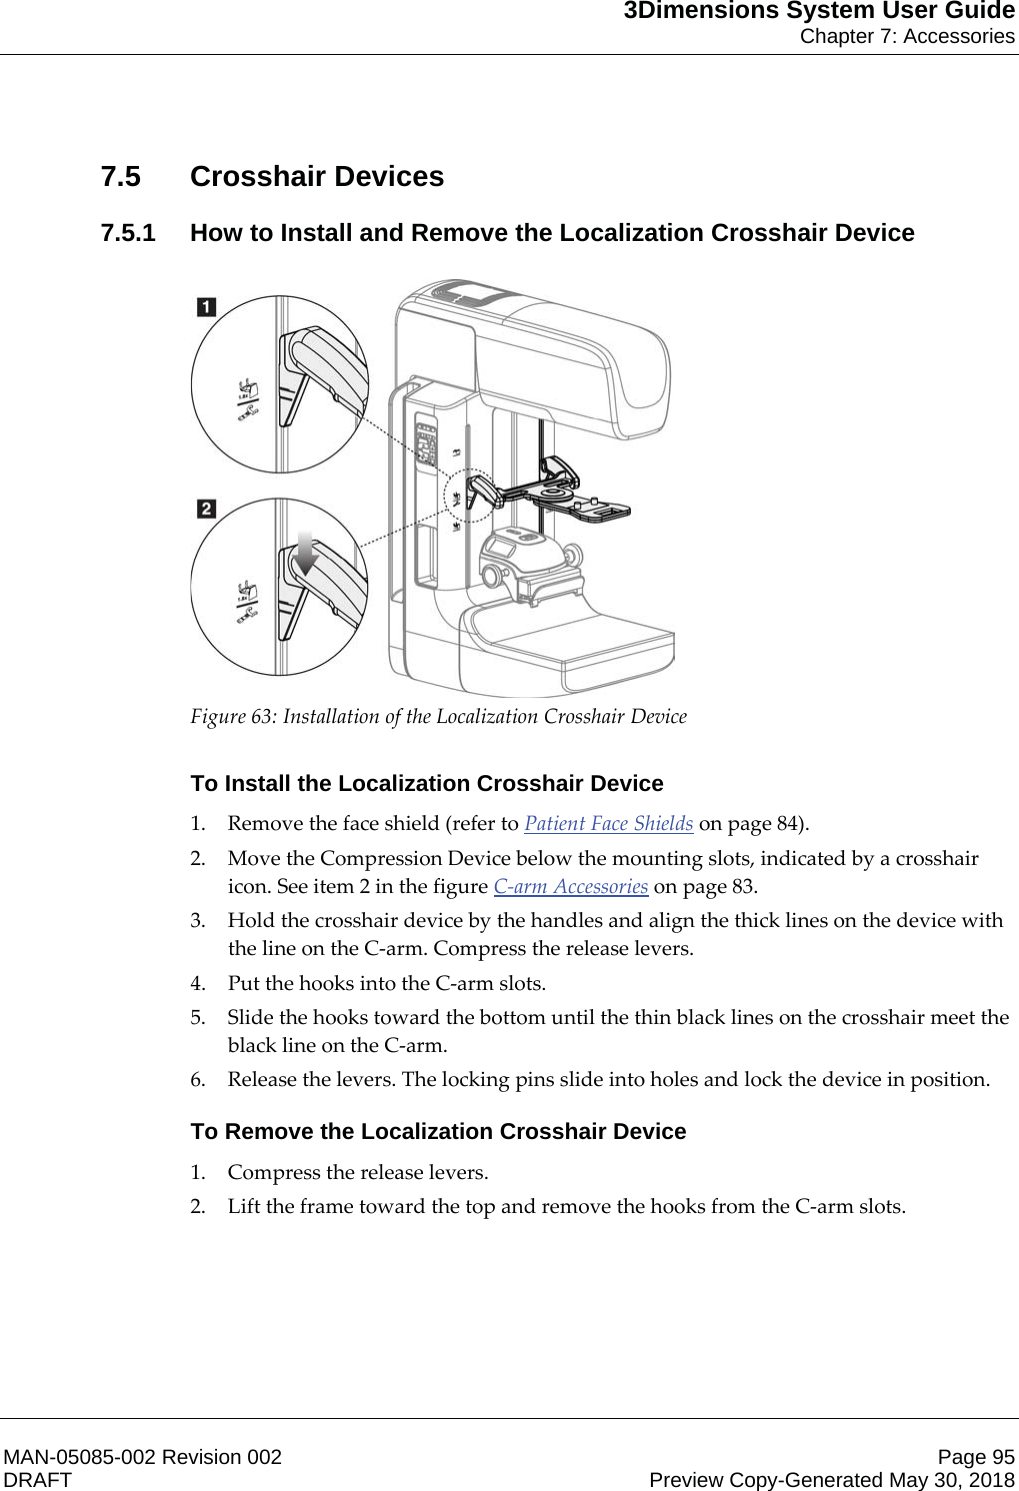 3Dimensions System User GuideChapter 7: AccessoriesMAN-05085-002 Revision 002 Page 95DRAFT Preview Copy-Generated May 30, 20187.5 Crosshair Devices7.5.1 How to Install and Remove the Localization Crosshair Device  Figure 63: Installation of the Localization Crosshair Device    To Install the Localization Crosshair Device1. Remove the face shield (refer to Patient Face Shields on page 84). 2. Move the Compression Device below the mounting slots, indicated by a crosshair icon. See item 2 in the figure C-arm Accessories on page 83. 3. Hold the crosshair device by the handles and align the thick lines on the device with the line on the C-arm. Compress the release levers. 4. Put the hooks into the C-arm slots. 5. Slide the hooks toward the bottom until the thin black lines on the crosshair meet the black line on the C-arm. 6. Release the levers. The locking pins slide into holes and lock the device in position. To Remove the Localization Crosshair Device1. Compress the release levers. 2. Lift the frame toward the top and remove the hooks from the C-arm slots. 